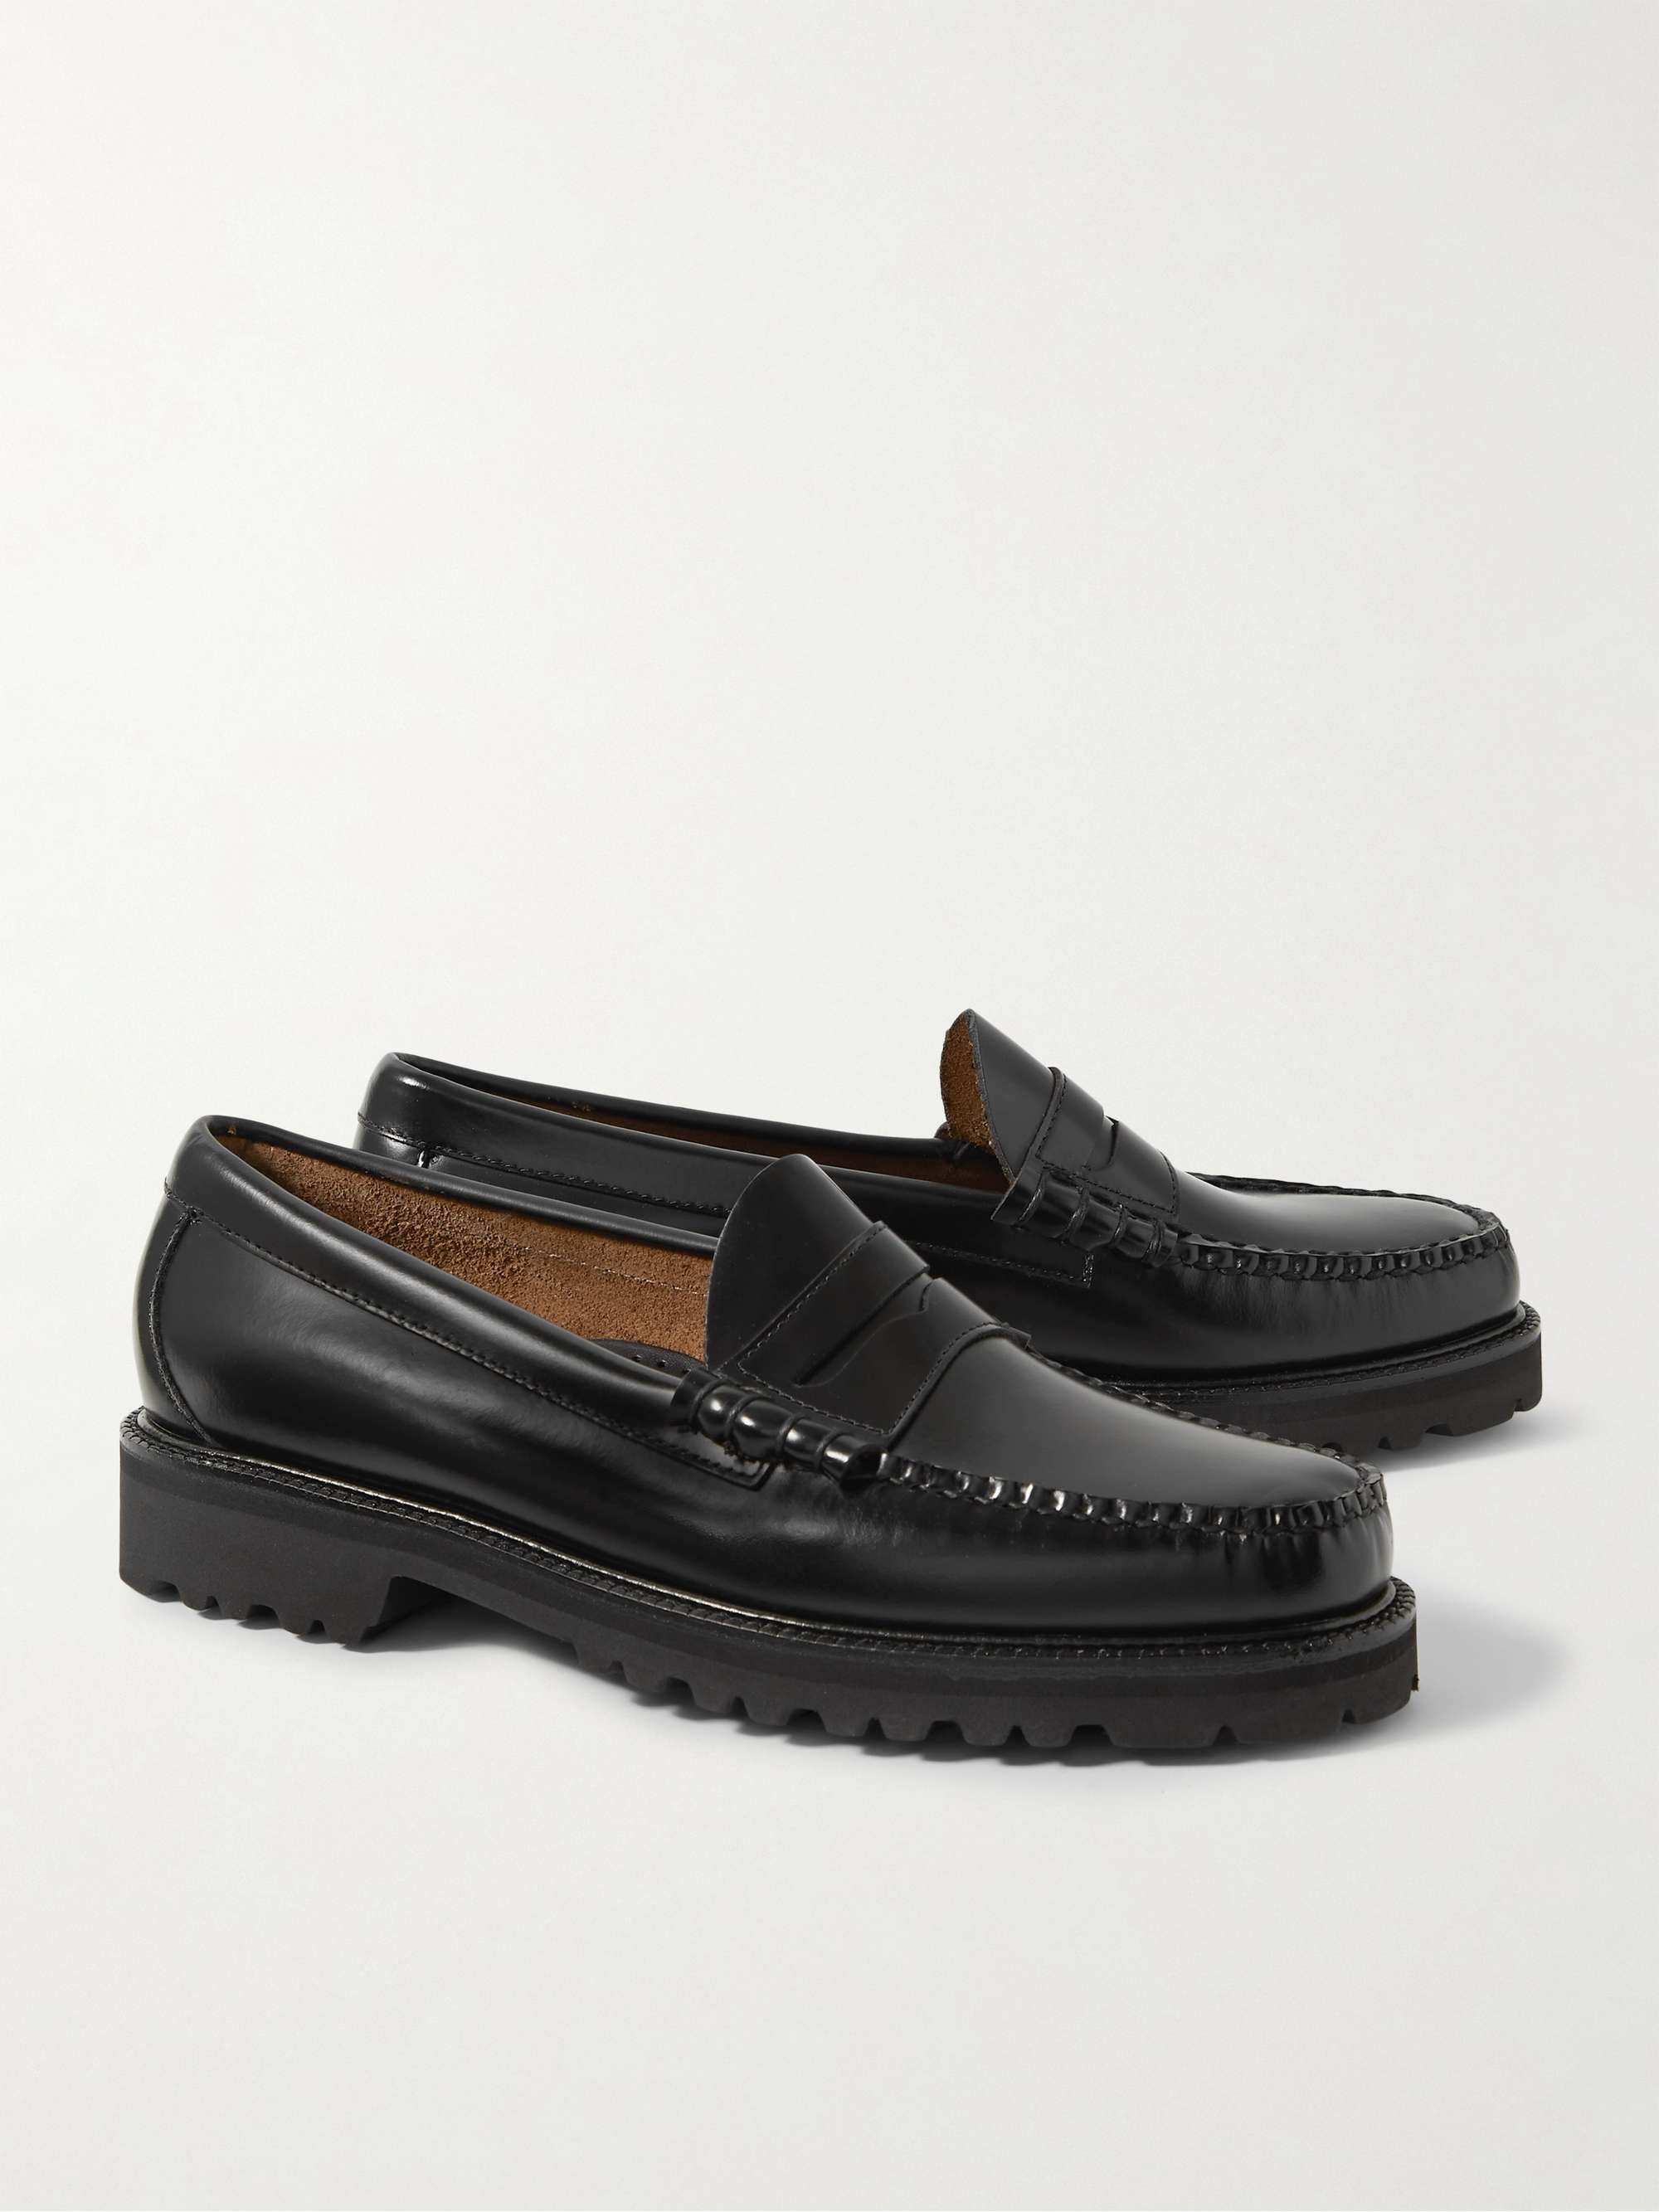 G.H. BASS & CO. Weejuns 90 Larson Leather Penny Loafers